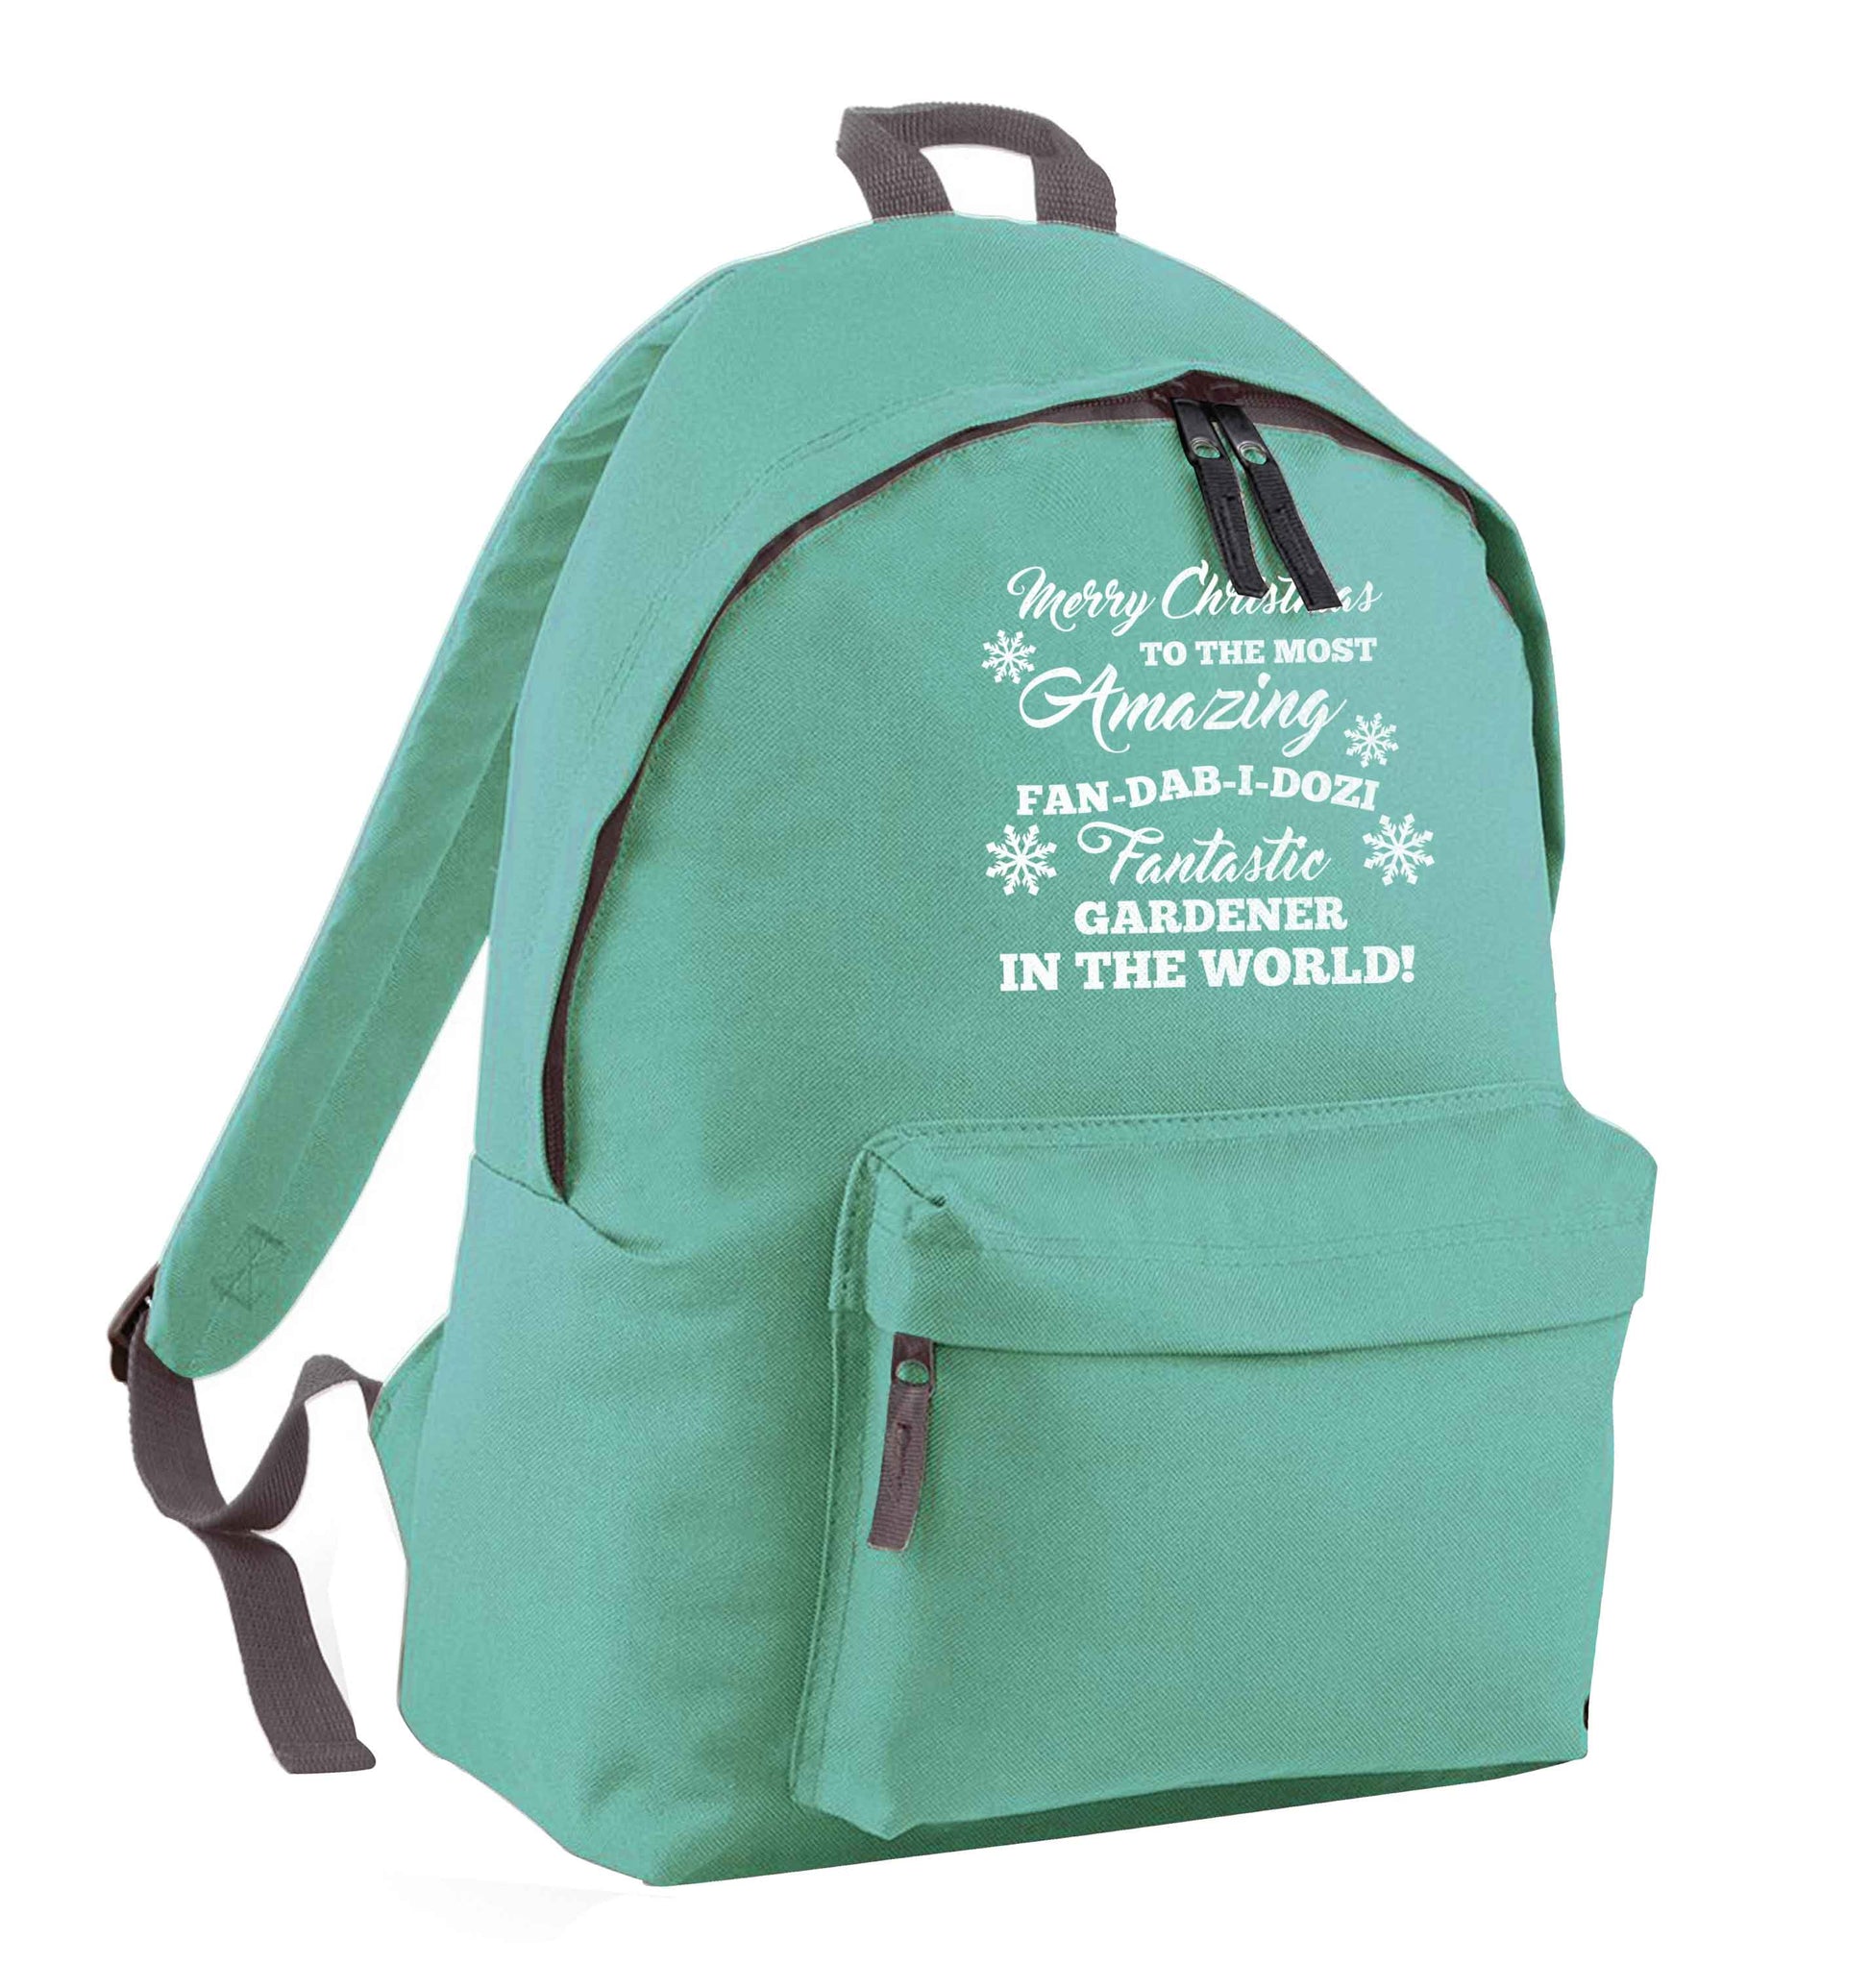 Merry Christmas to the most amazing gardener in the world! mint adults backpack